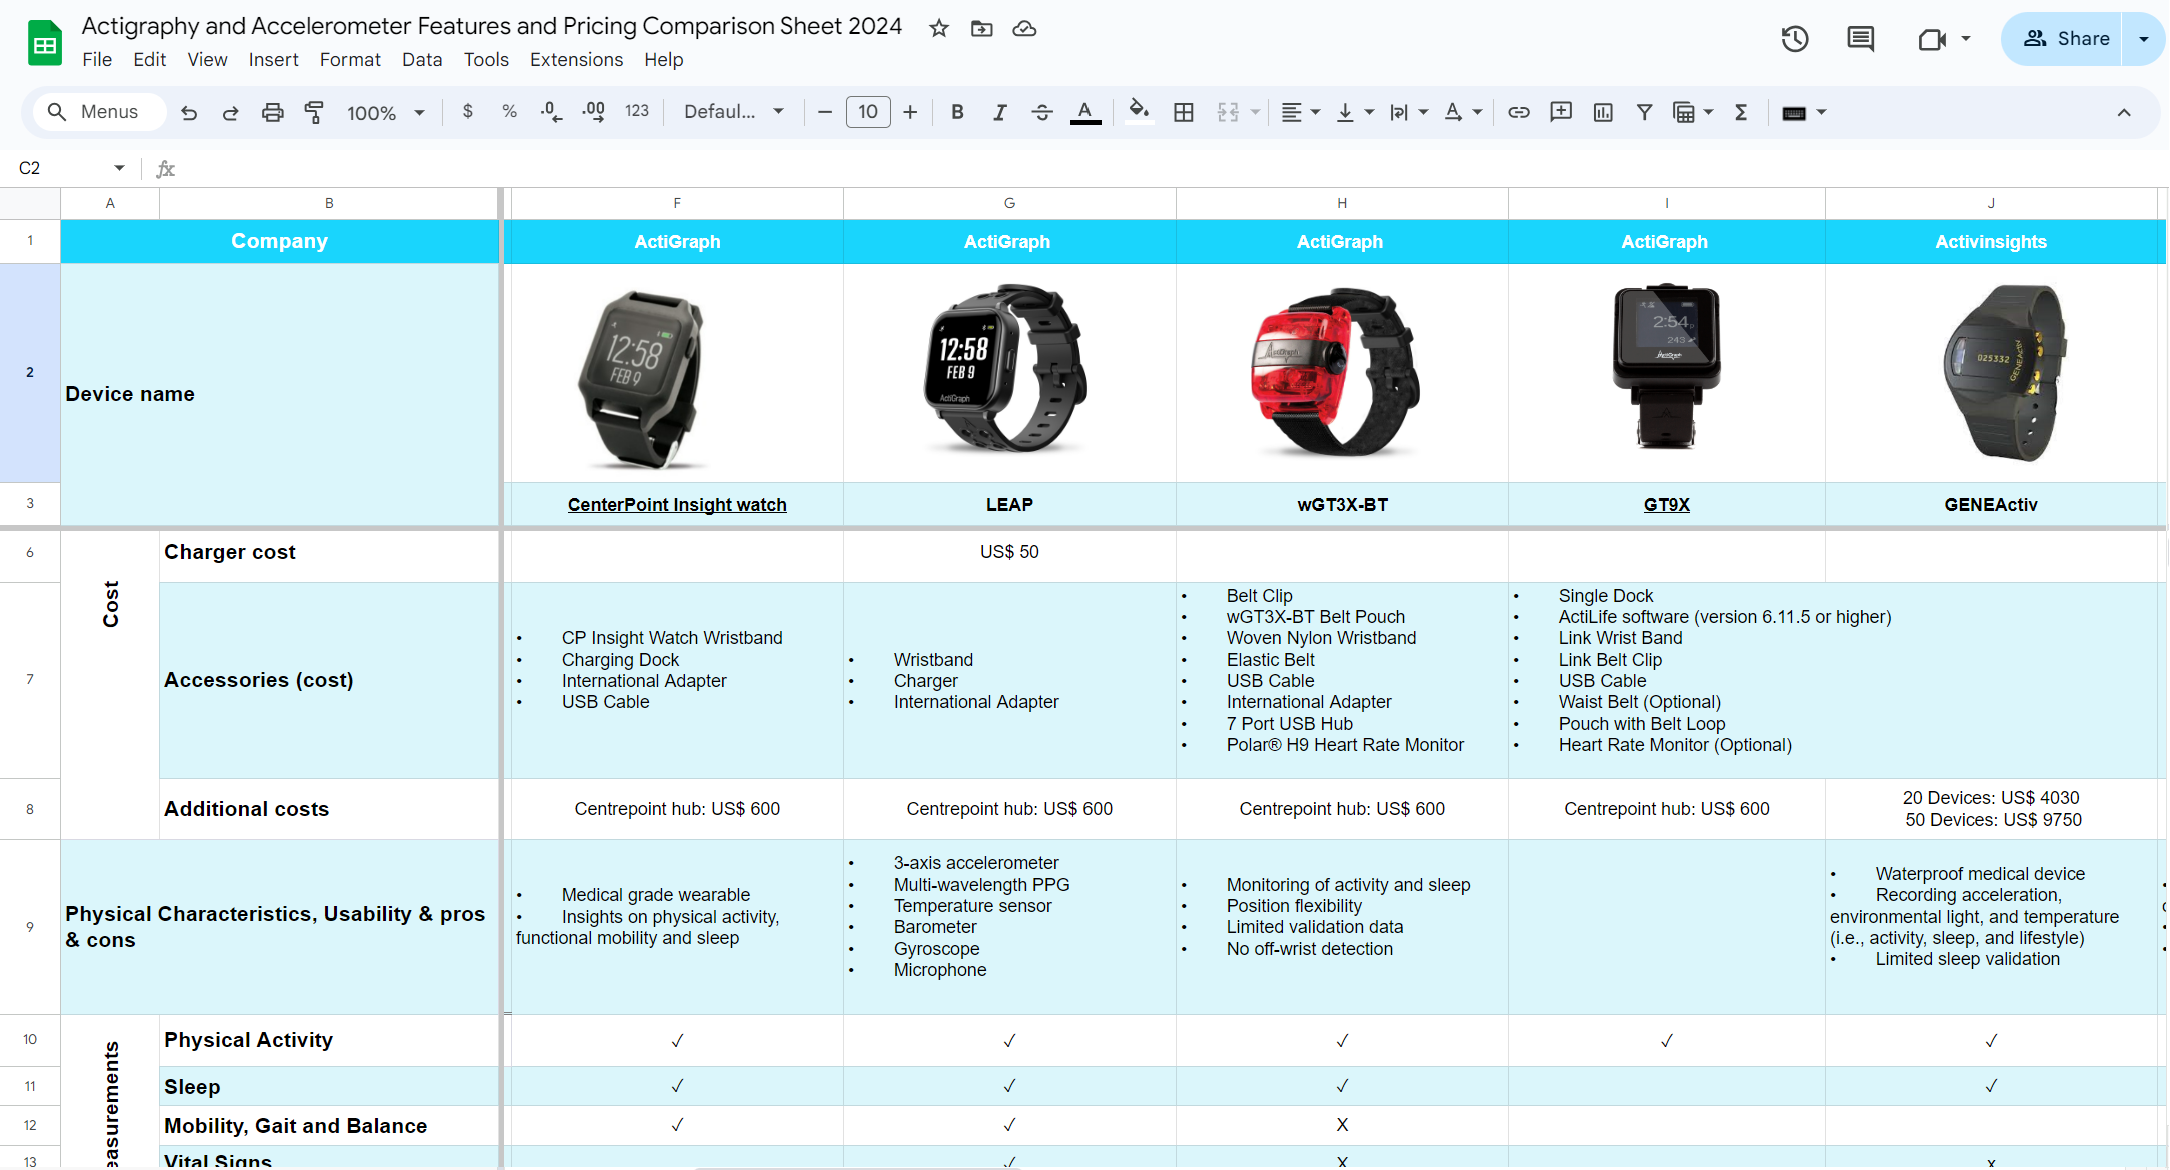 Comparison sheet of various activity tracker features and pricing displayed in a spreadsheet.